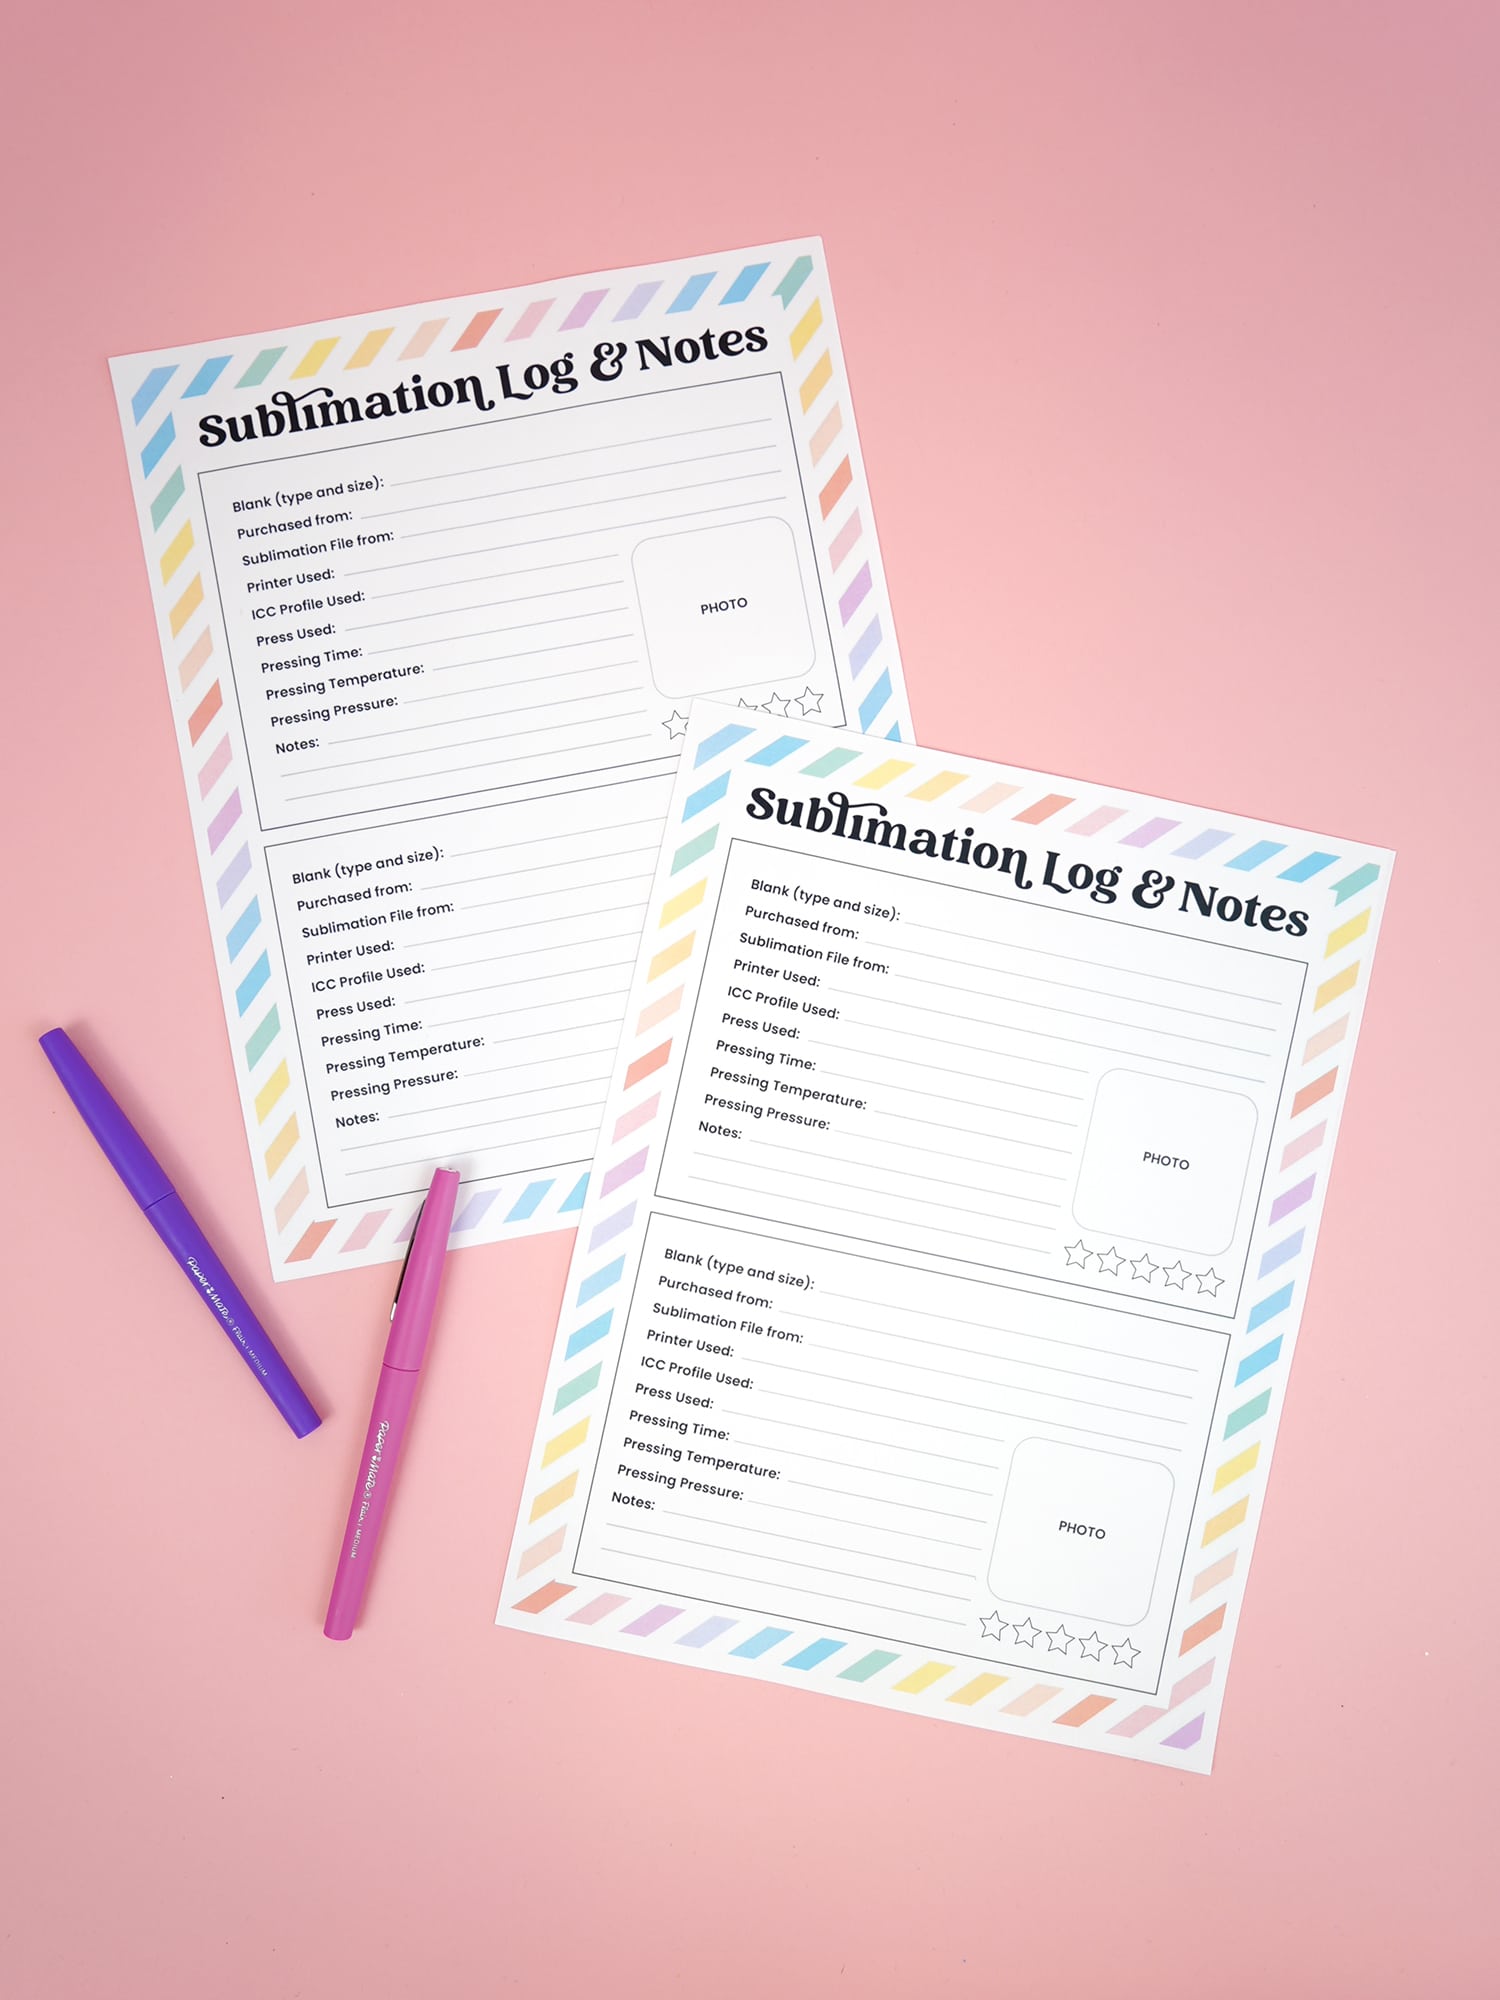 Free printable sublimation log and notes sheets on pink background with purple pen